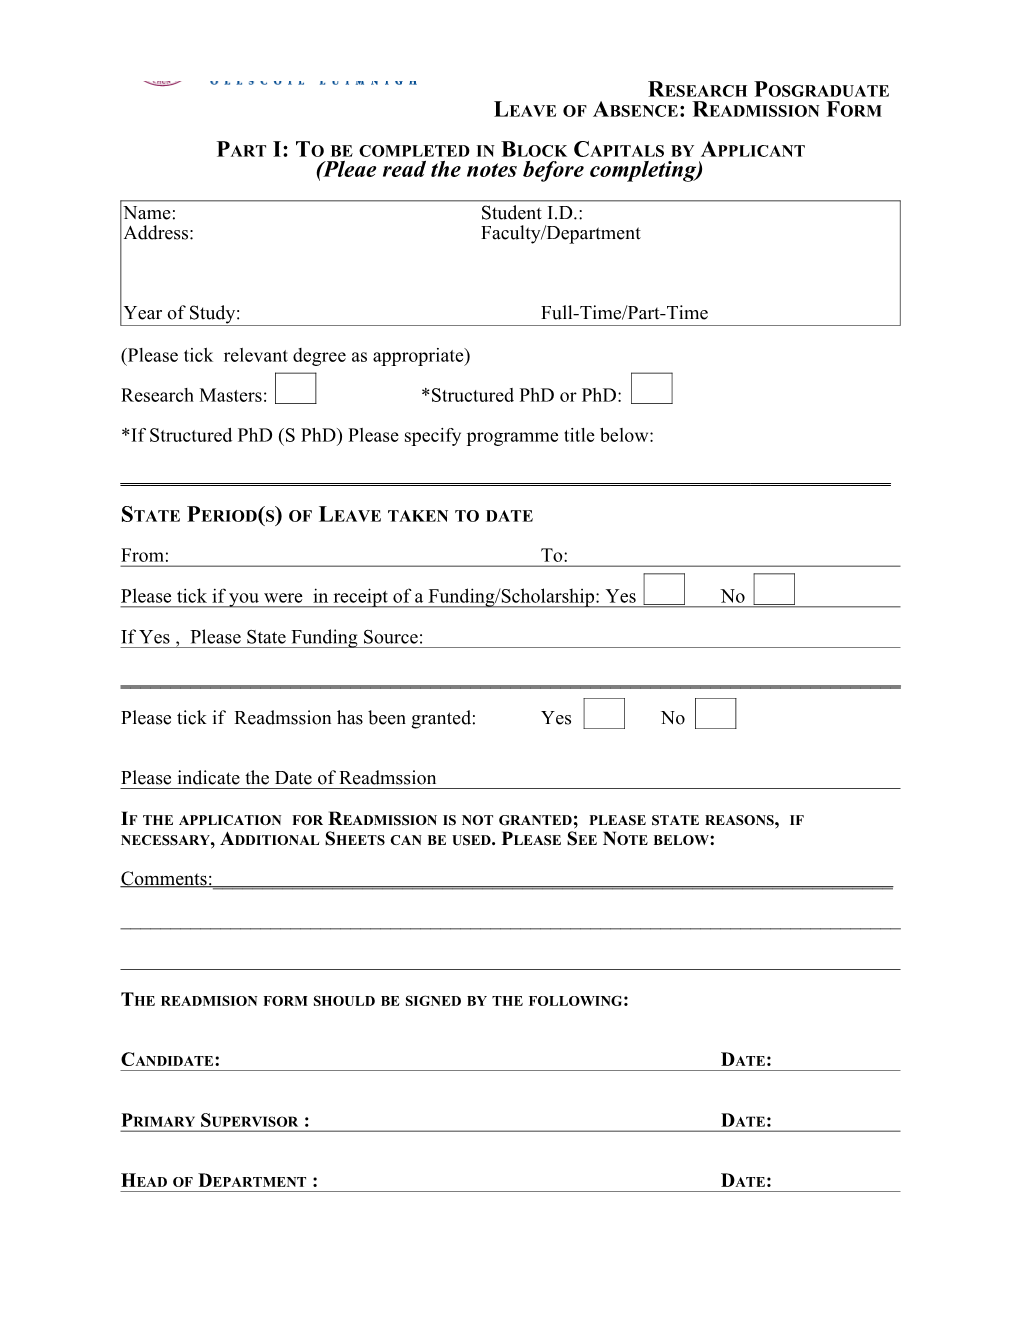 Application for Leave of Absence